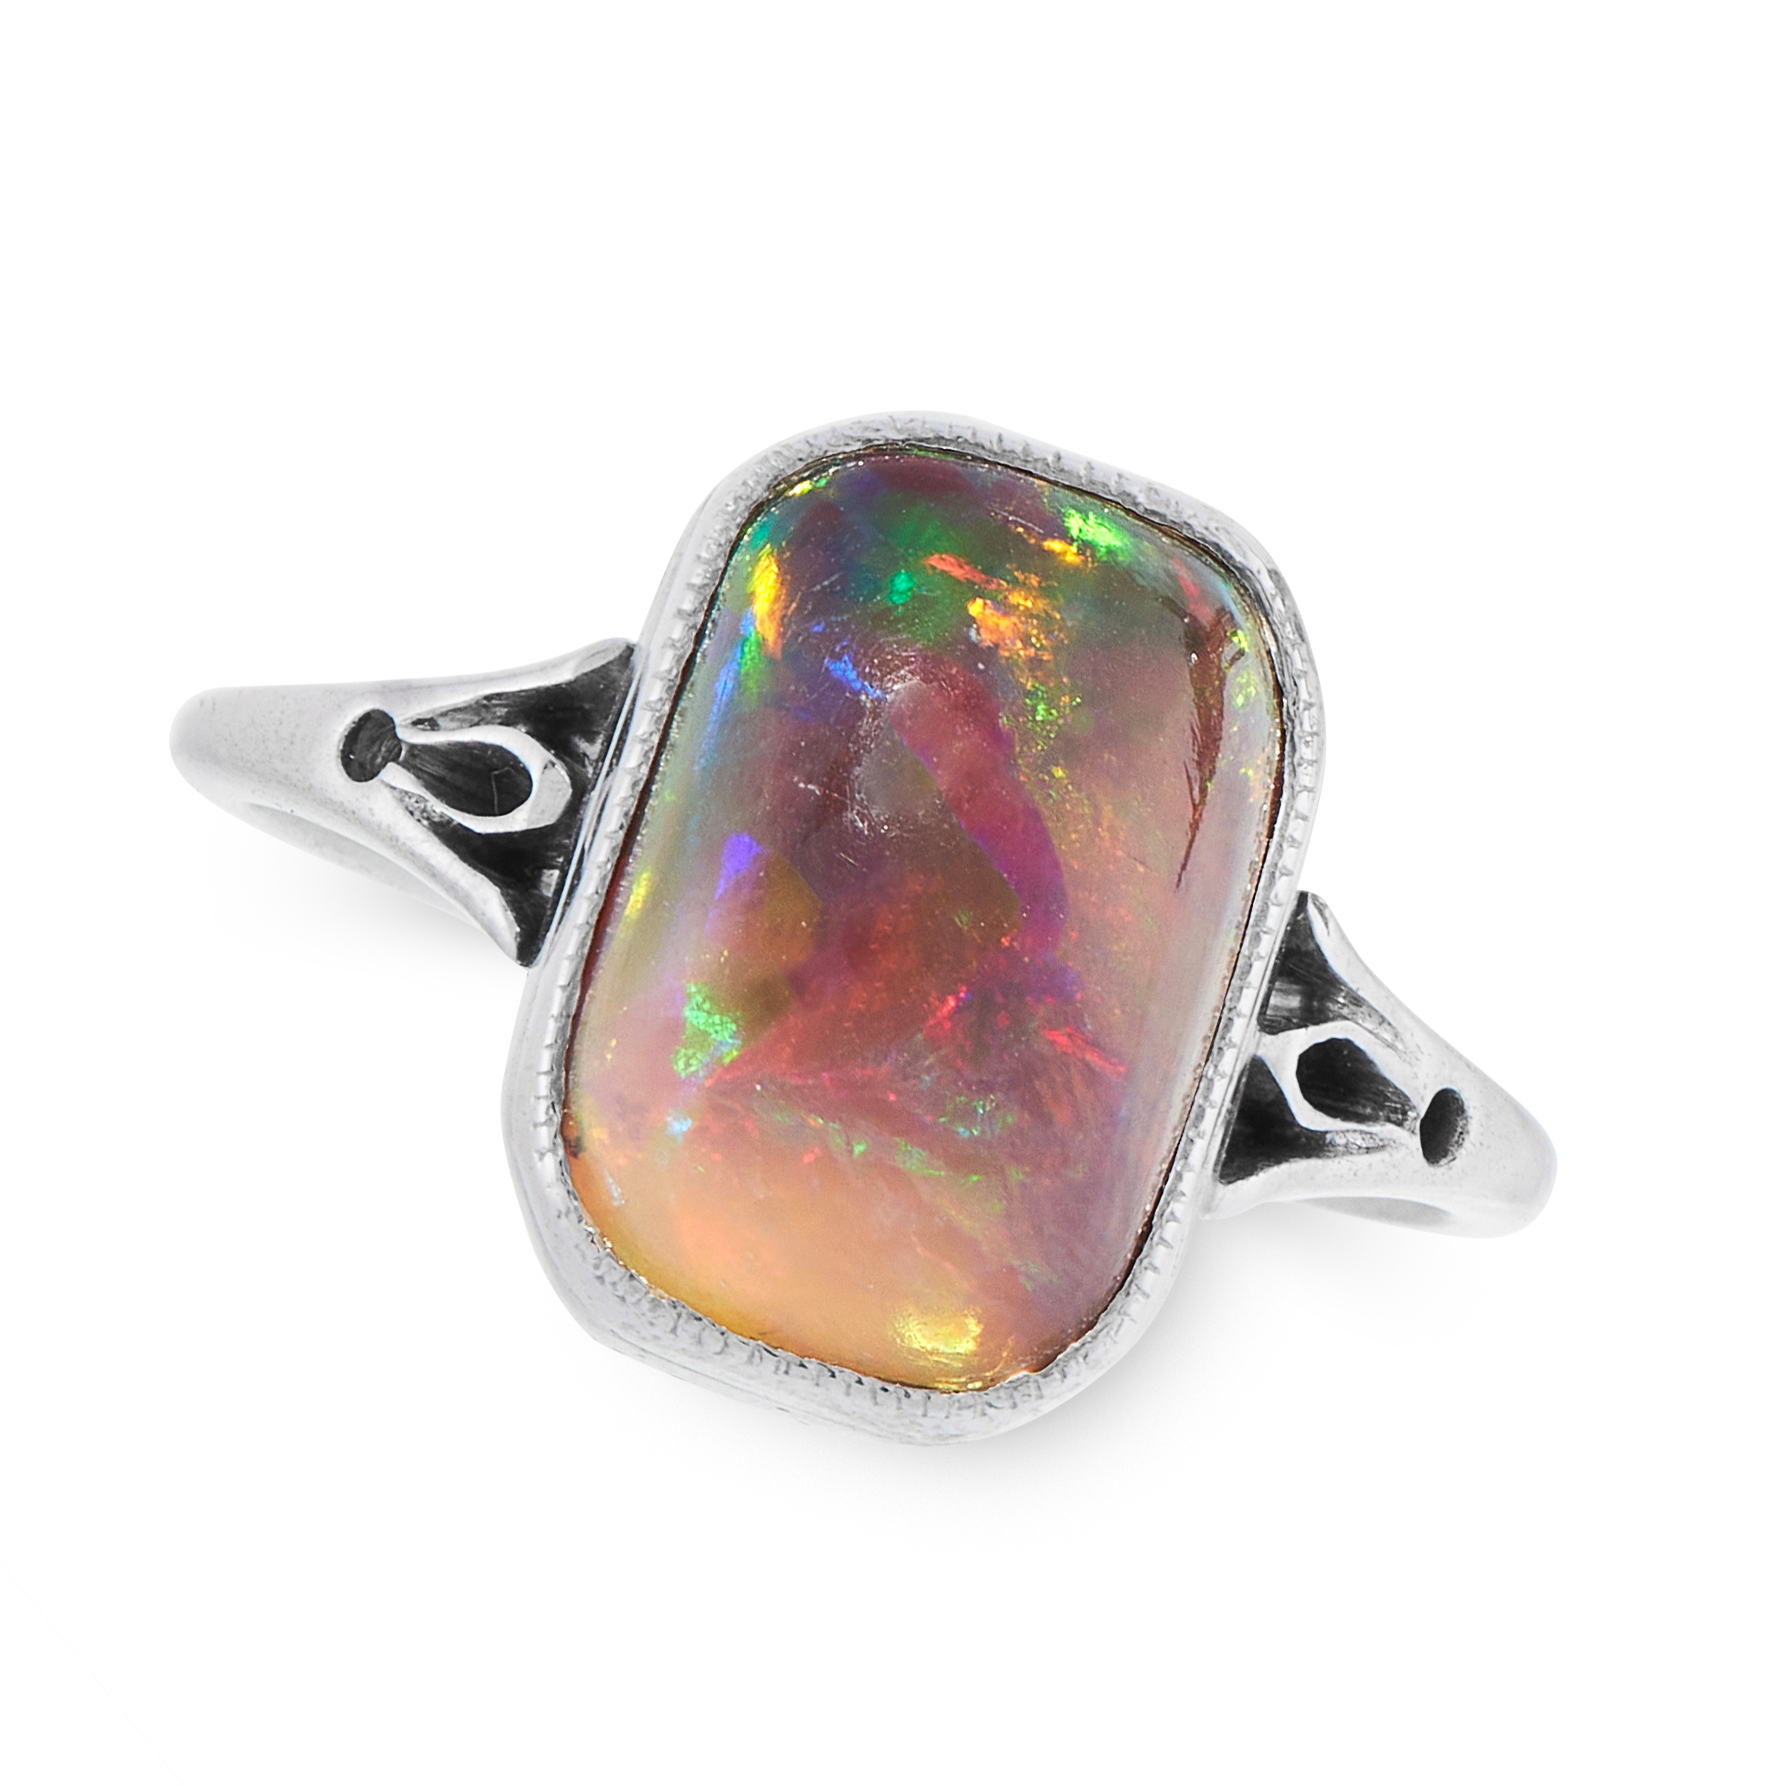 A BLACK OPAL DRESS RING set with a rectangular cabochon black opal of 3.08 carats, unmarked, size